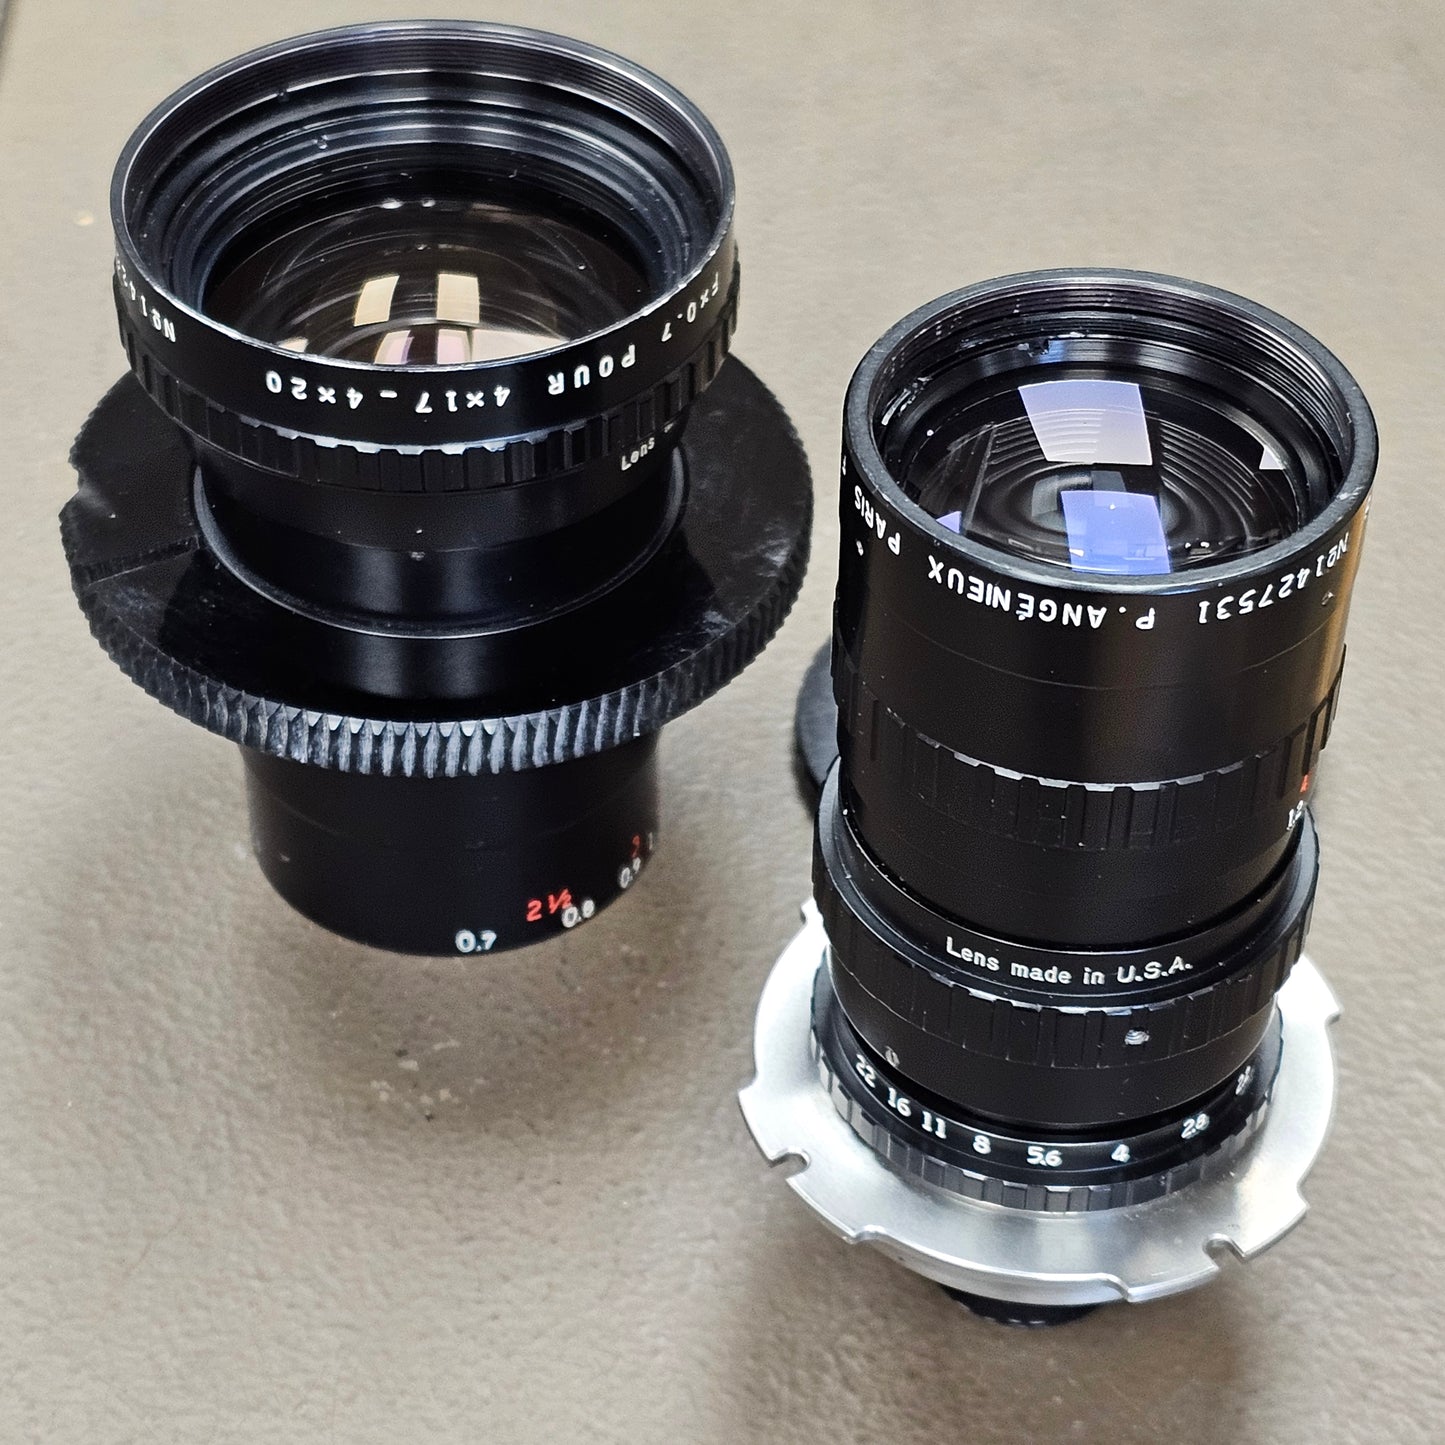 Angenieux 17.5-70mm f2.2/T2.5 Type 4x17.5B PL Mount S# 1427531 with Retro-Zoom Attachment